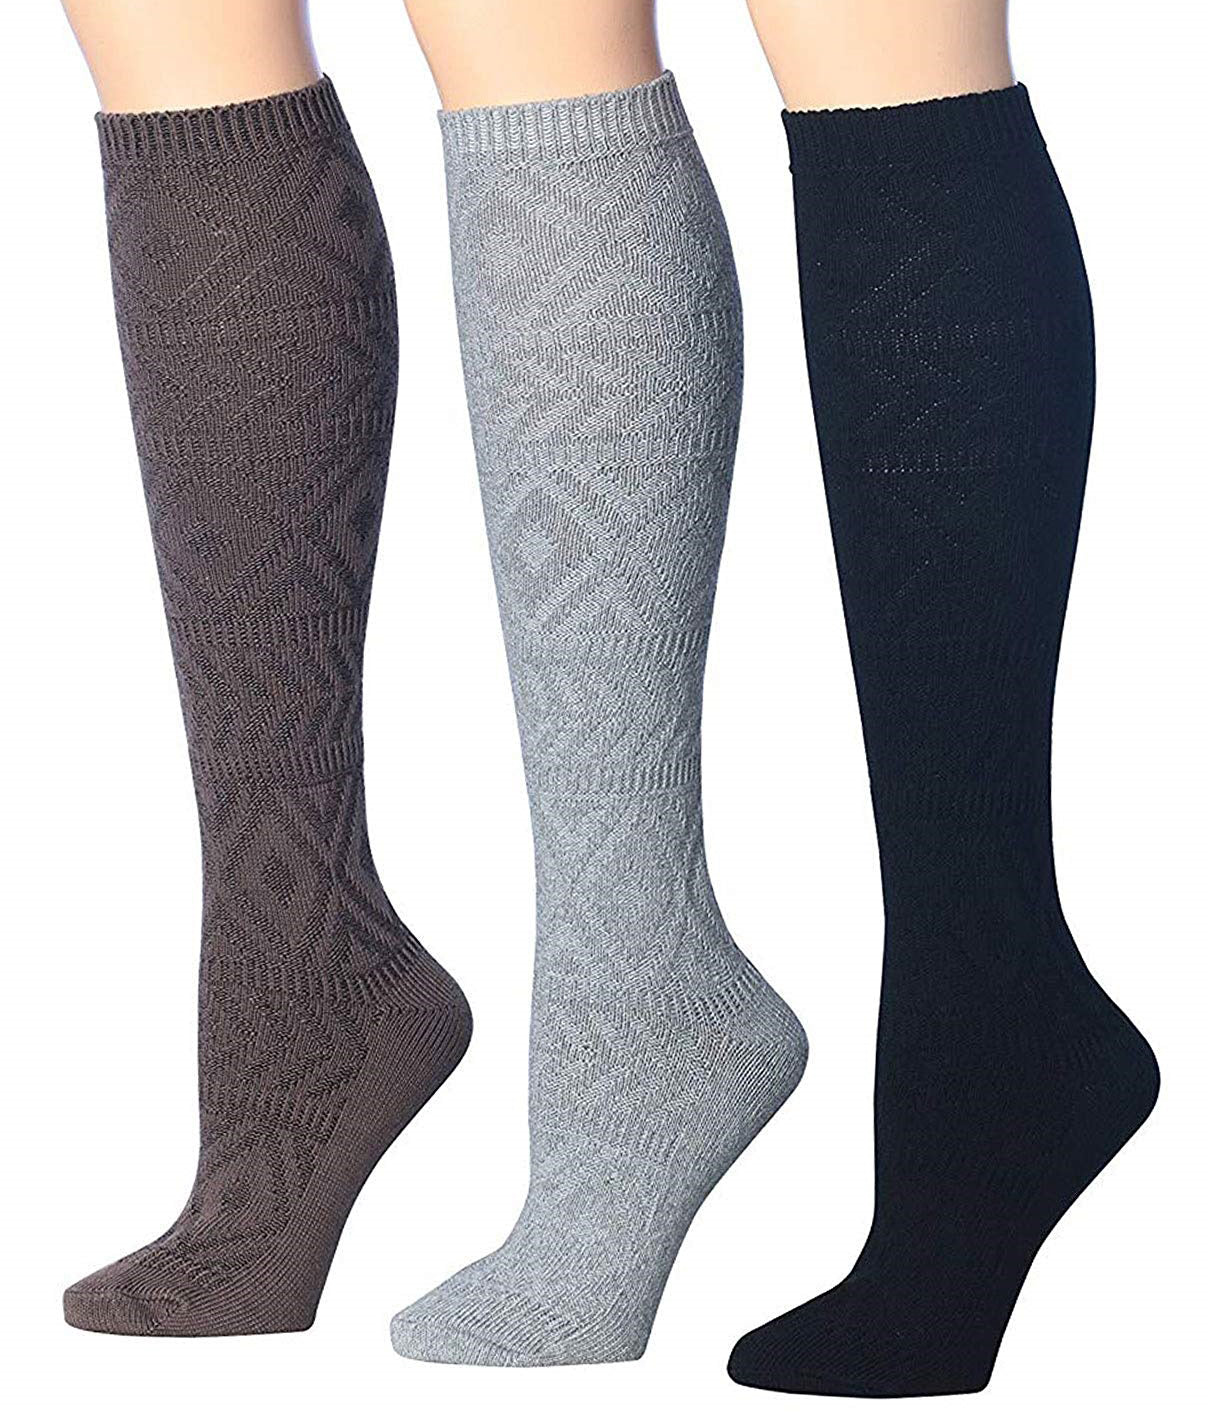 Tipi Toe Women's 3-Pairs Winter Warm Knee High / Over The Knee With Buttons Cotton-Blend Boot Socks